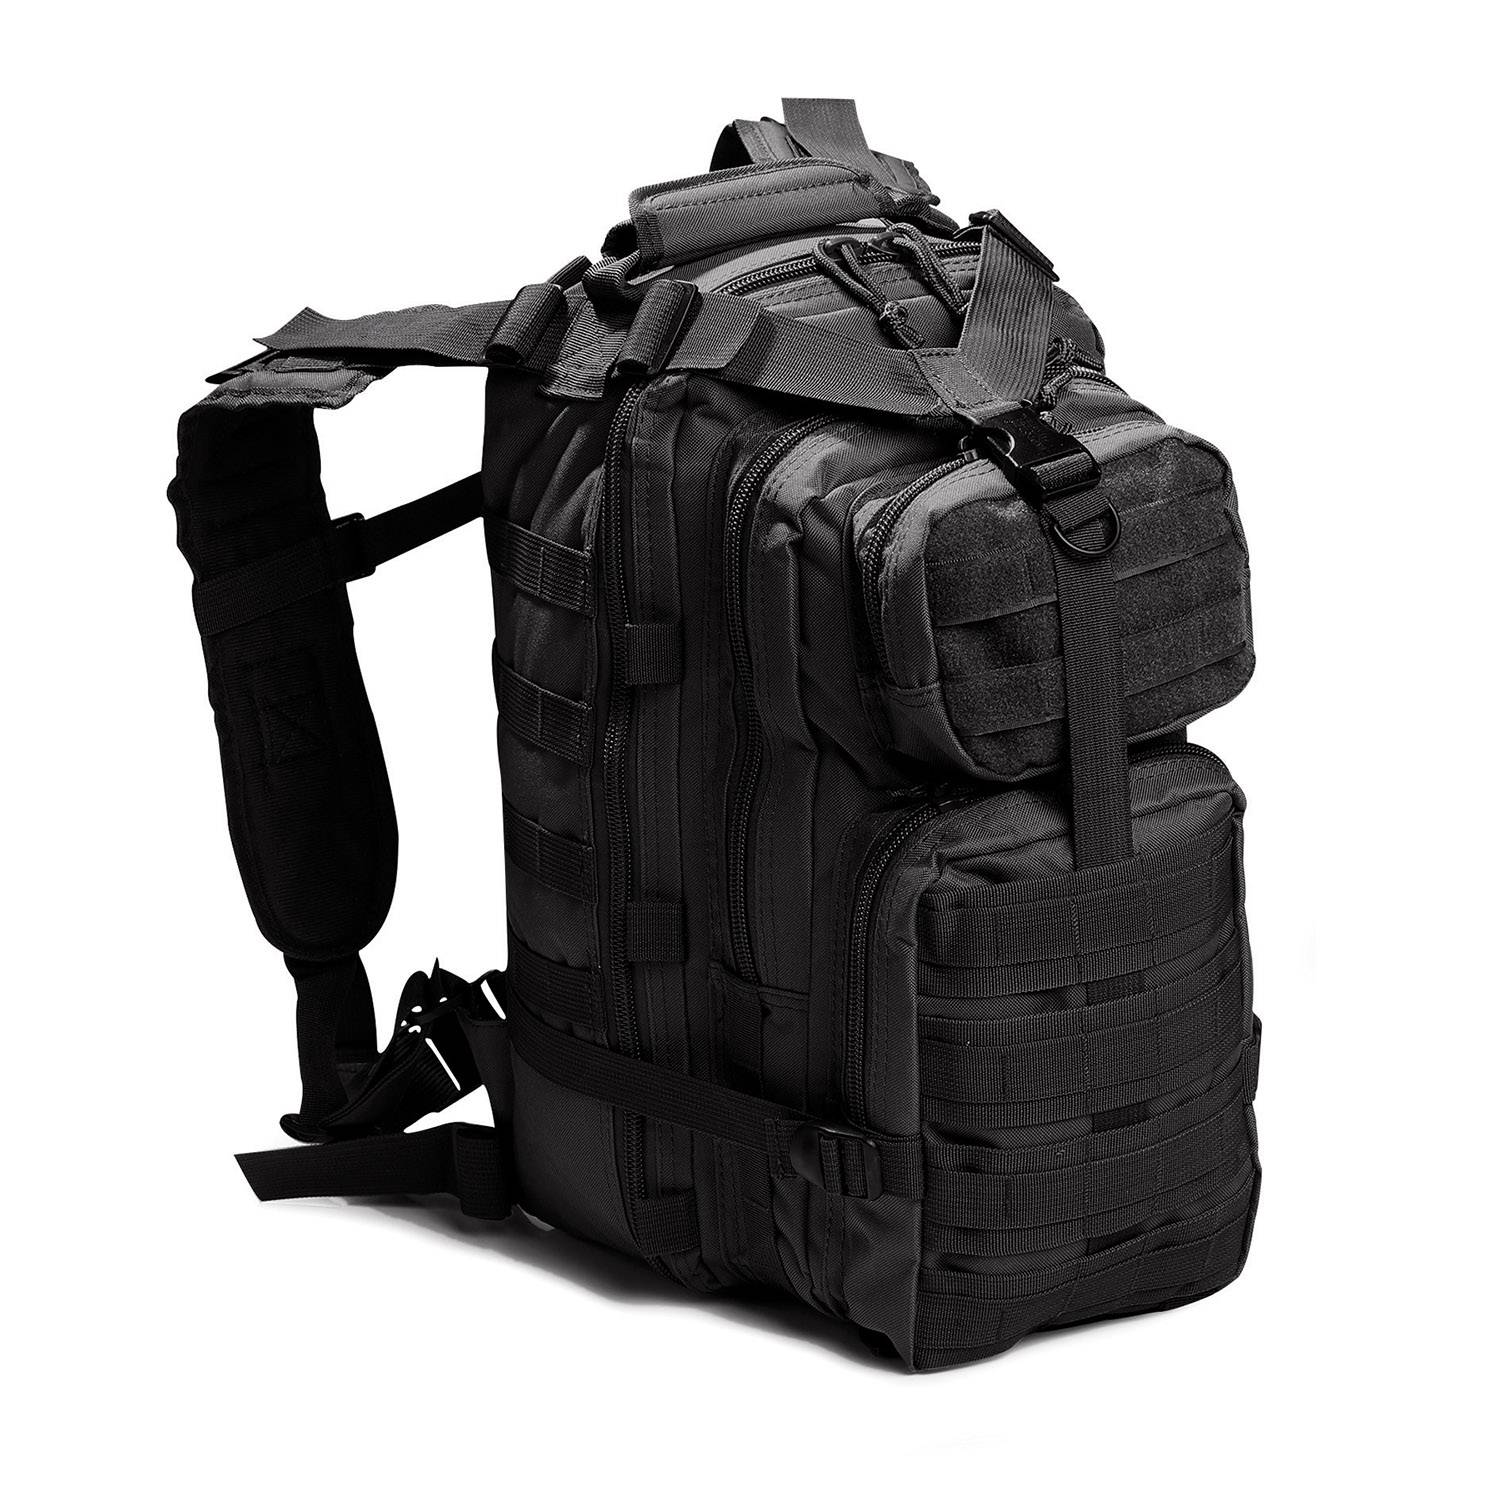 GALLS TACTICAL MOLLE BACKPACK